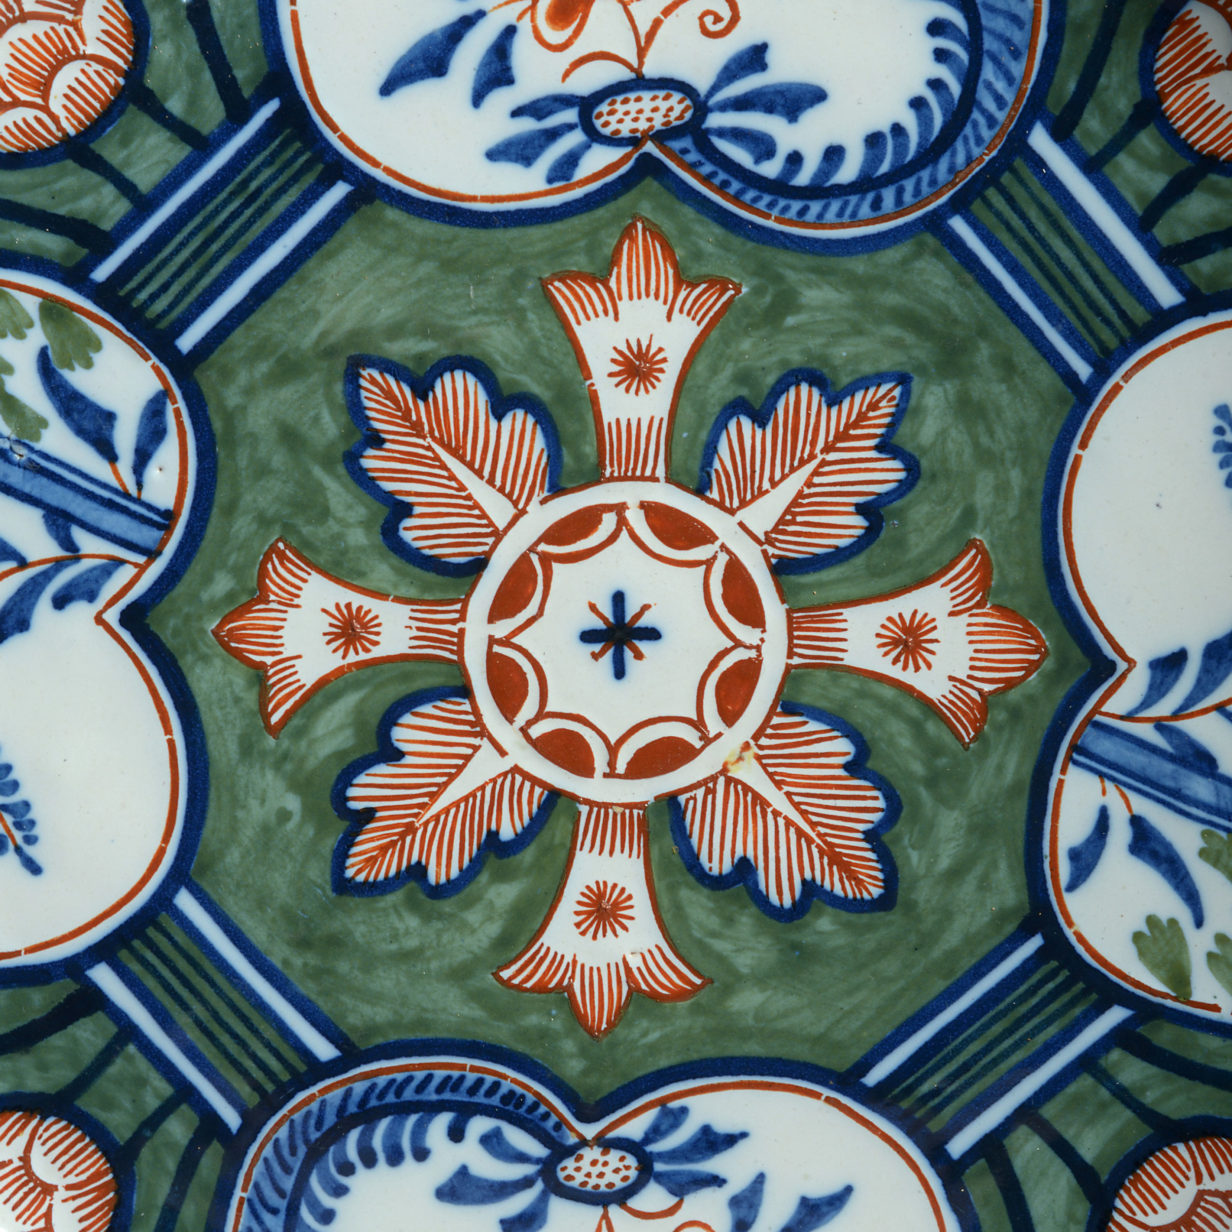 An 18th century polychrome delft charger